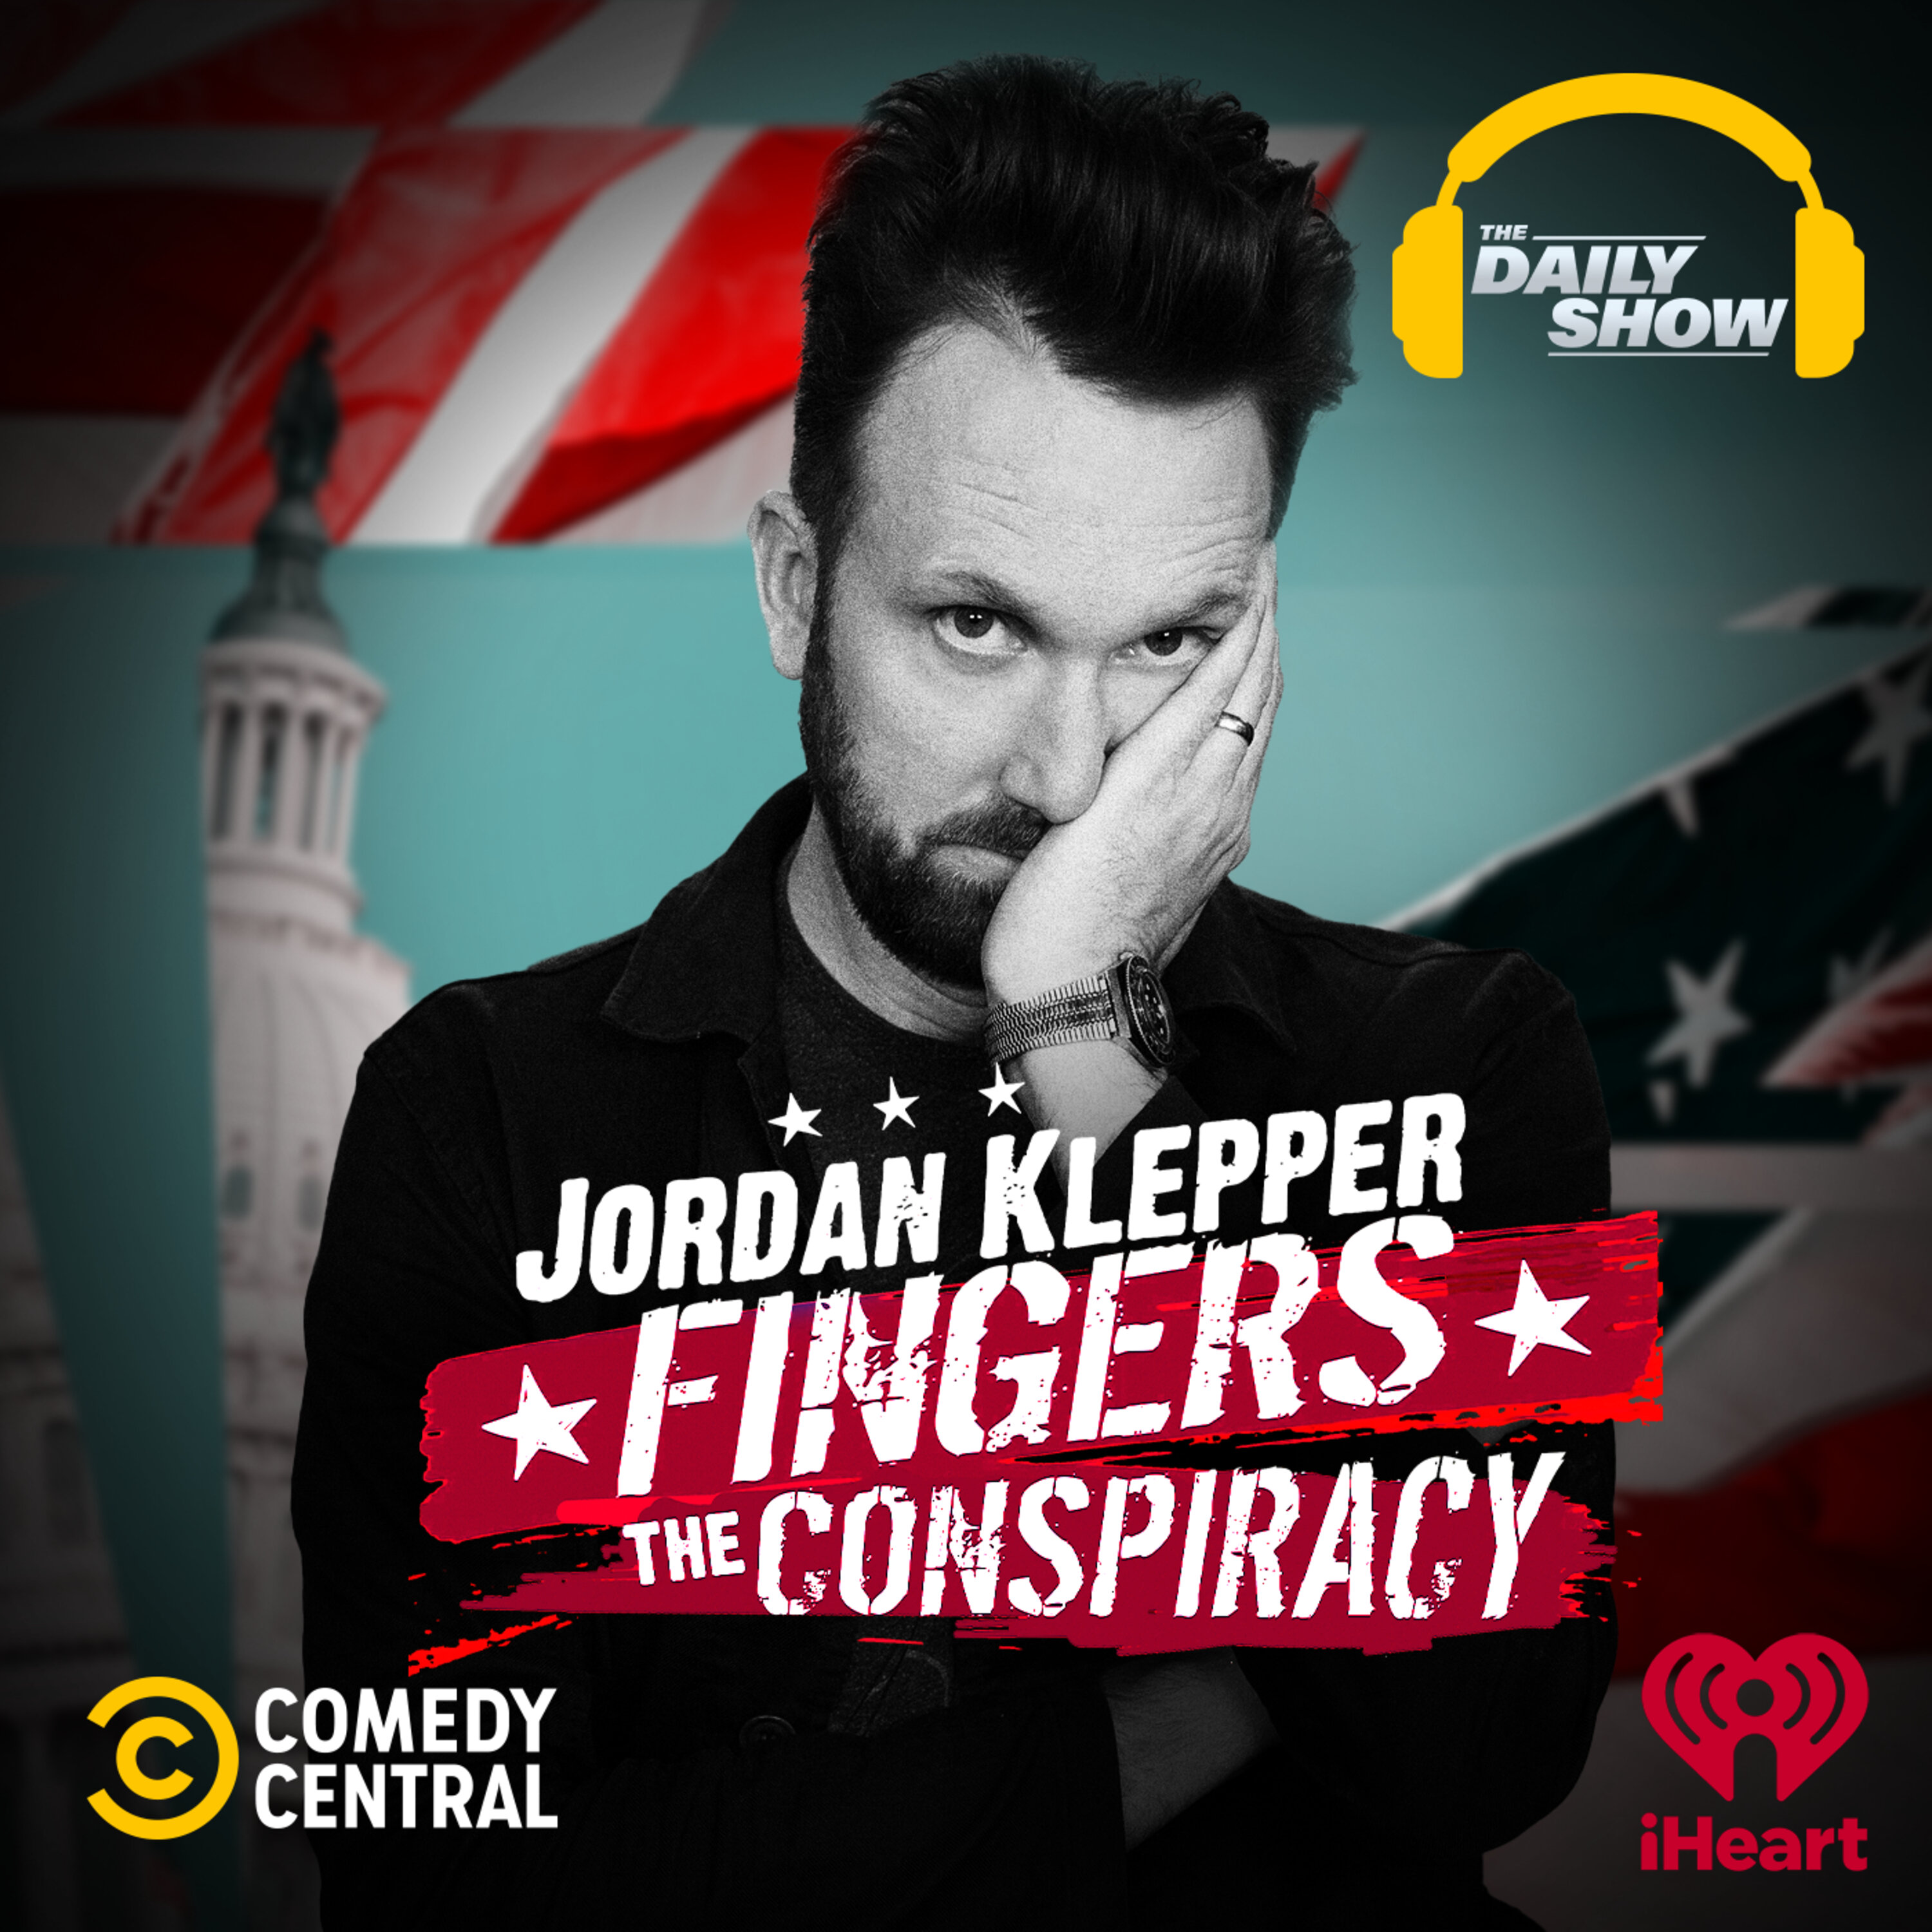 Jordan Klepper Fingers the Conspiracy:Comedy Central & iHeartPodcasts